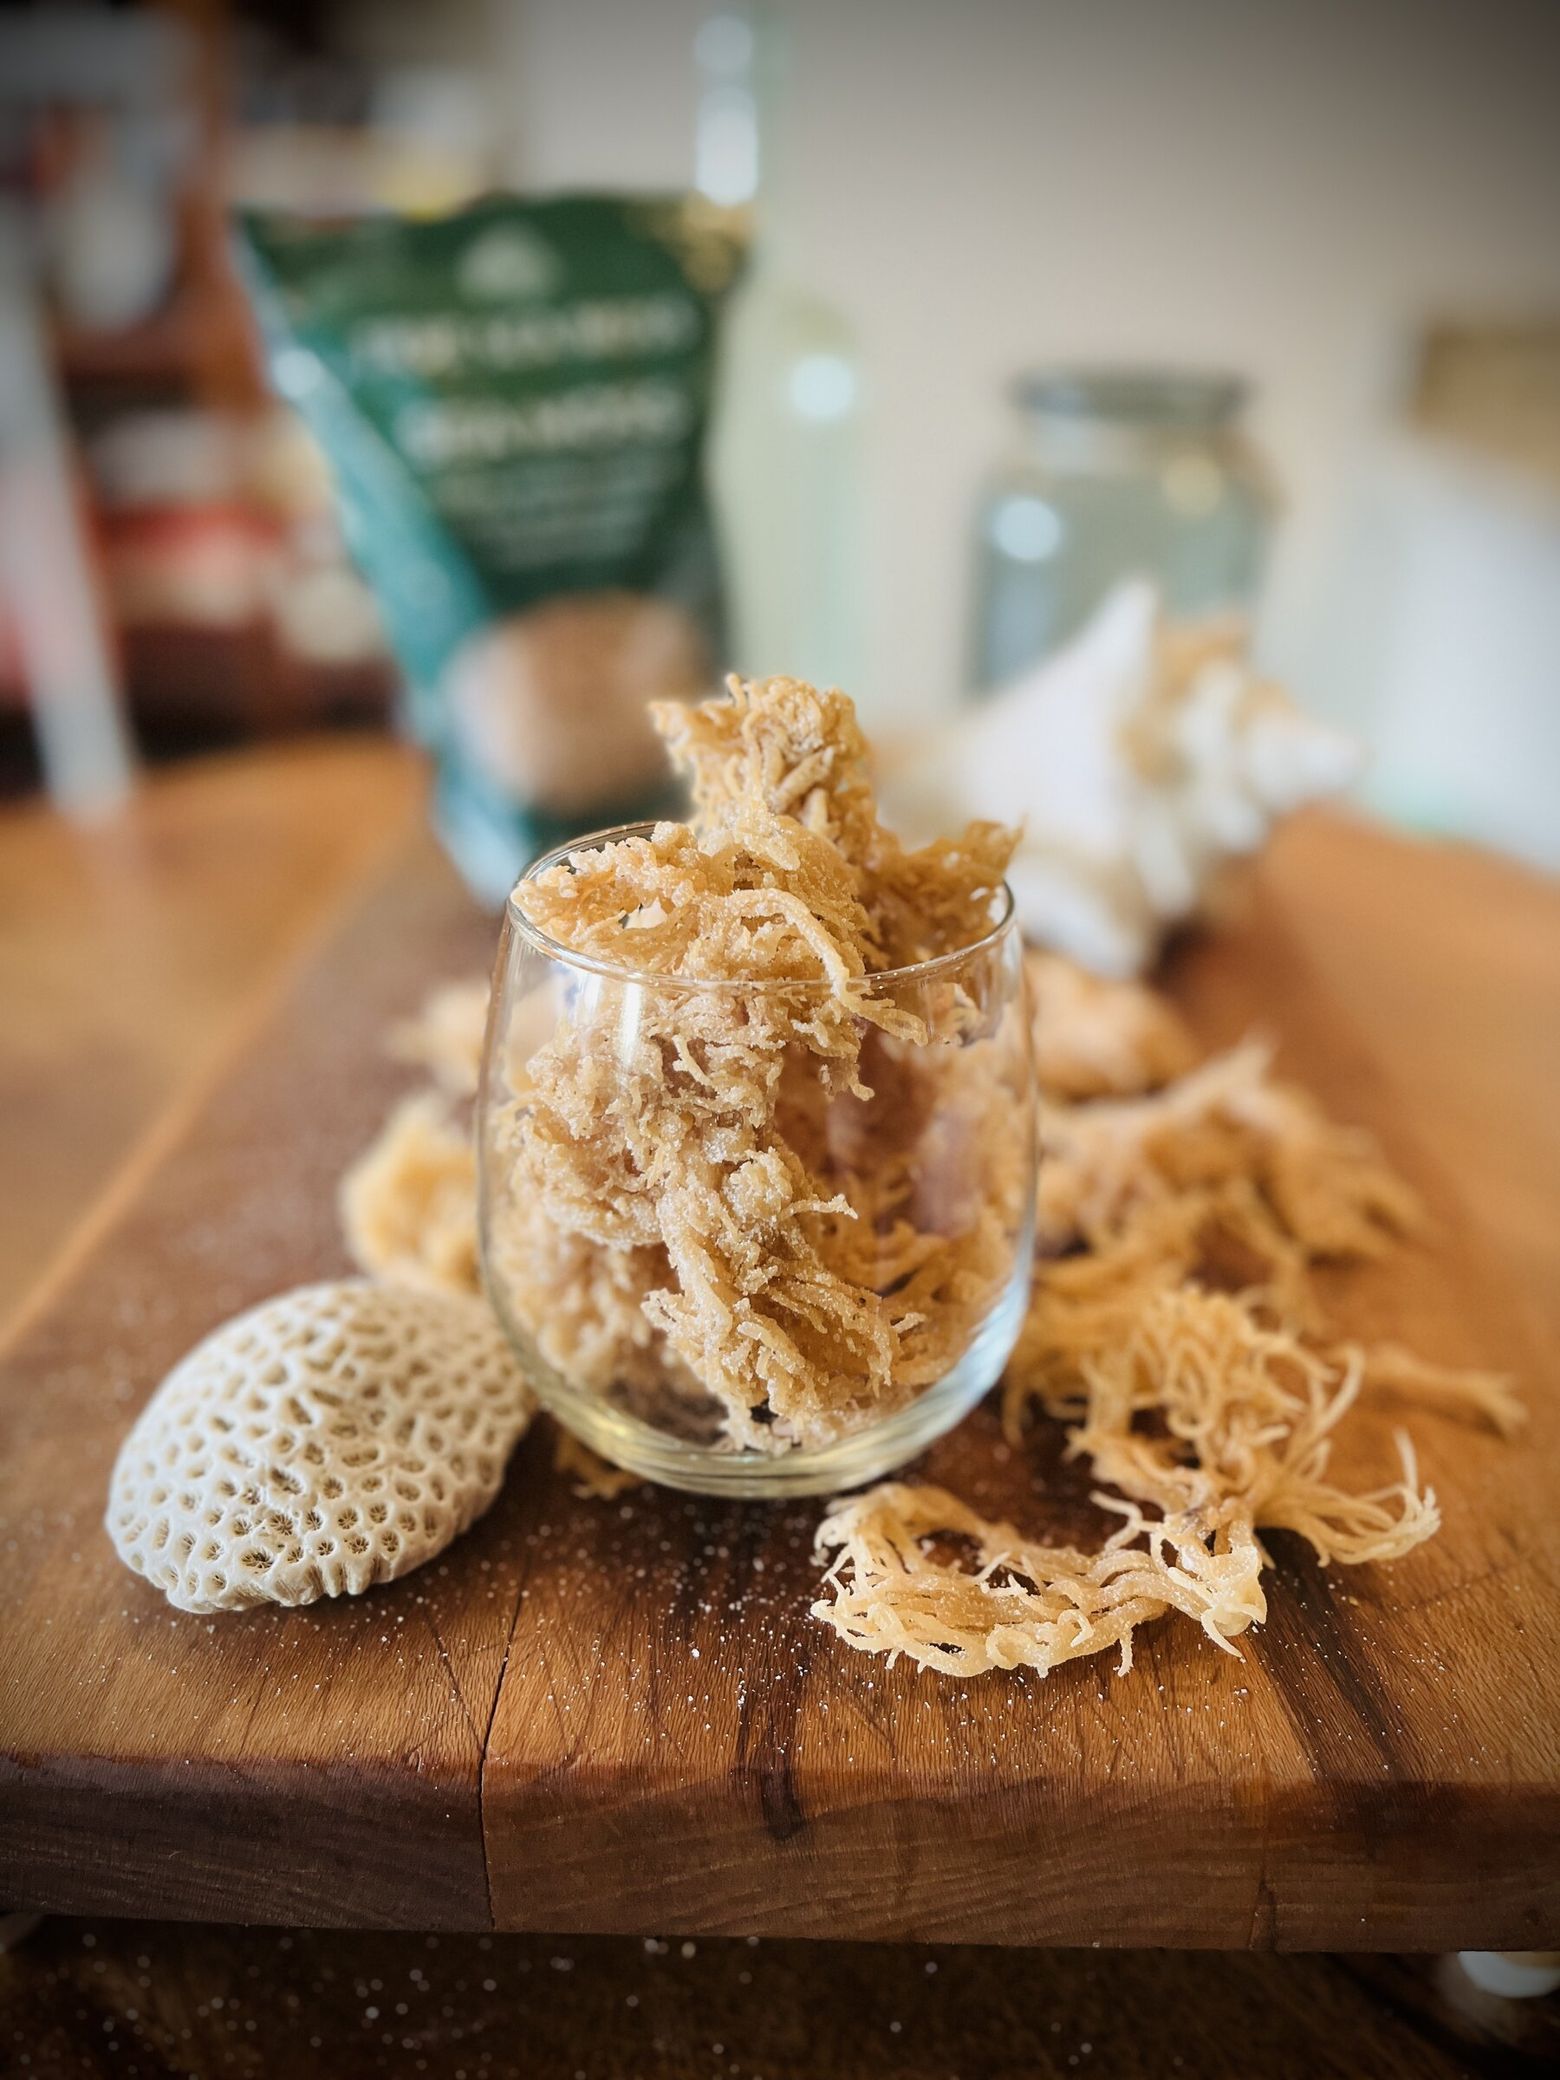 How to make trendy Irish Moss: It's like eggnog — except with